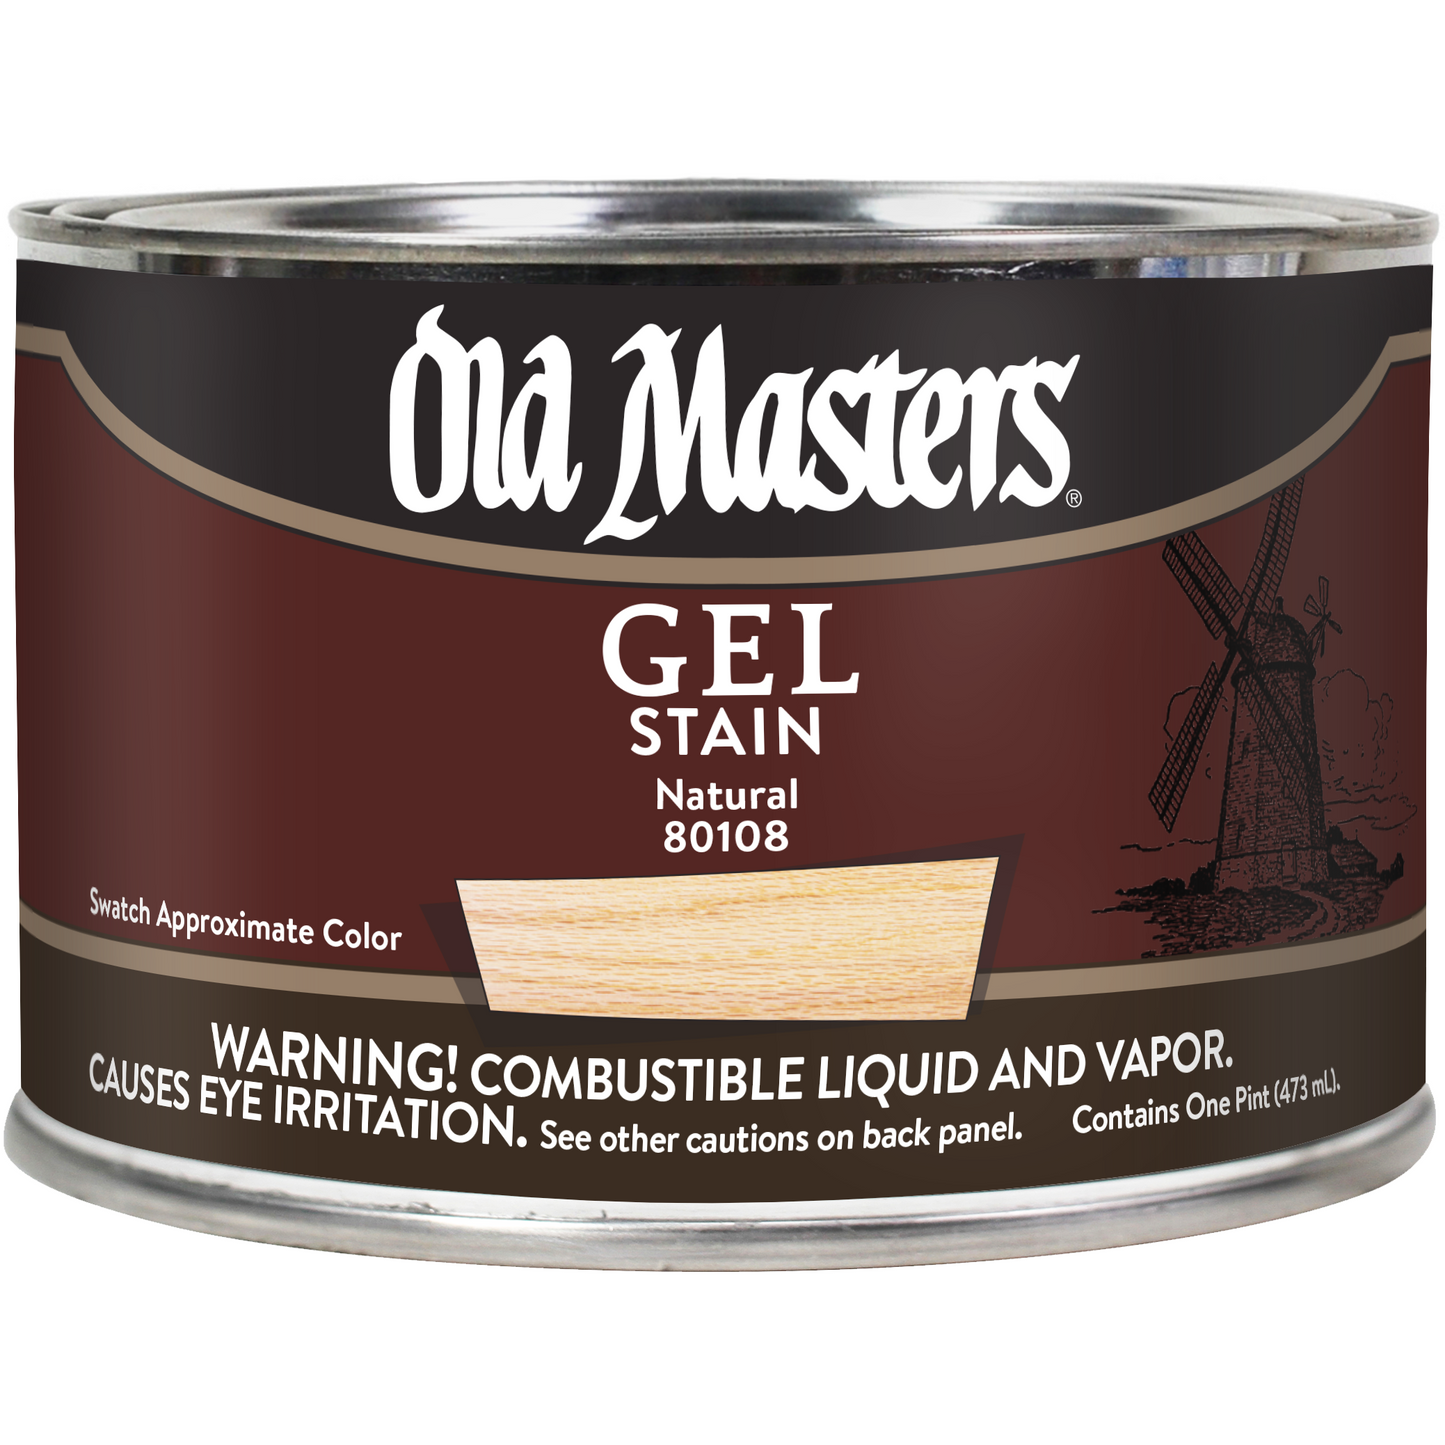 Old Masters Gel Stain - Natural